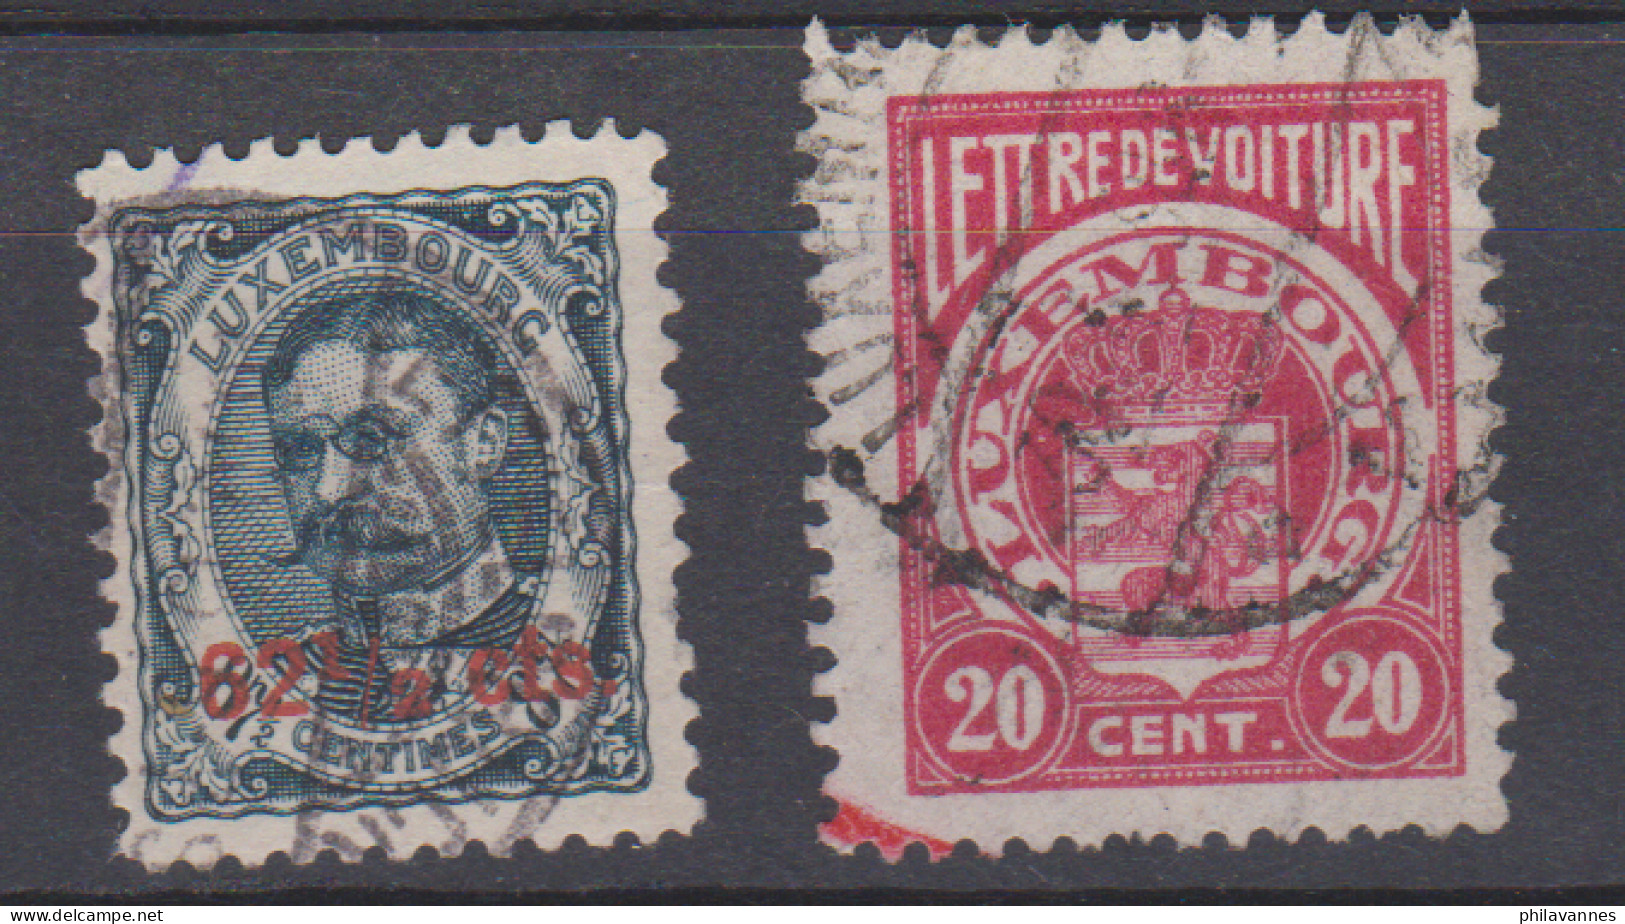 Luxembourg,n° 86 ( Lux/ 1.6) - 1906 Willem IV